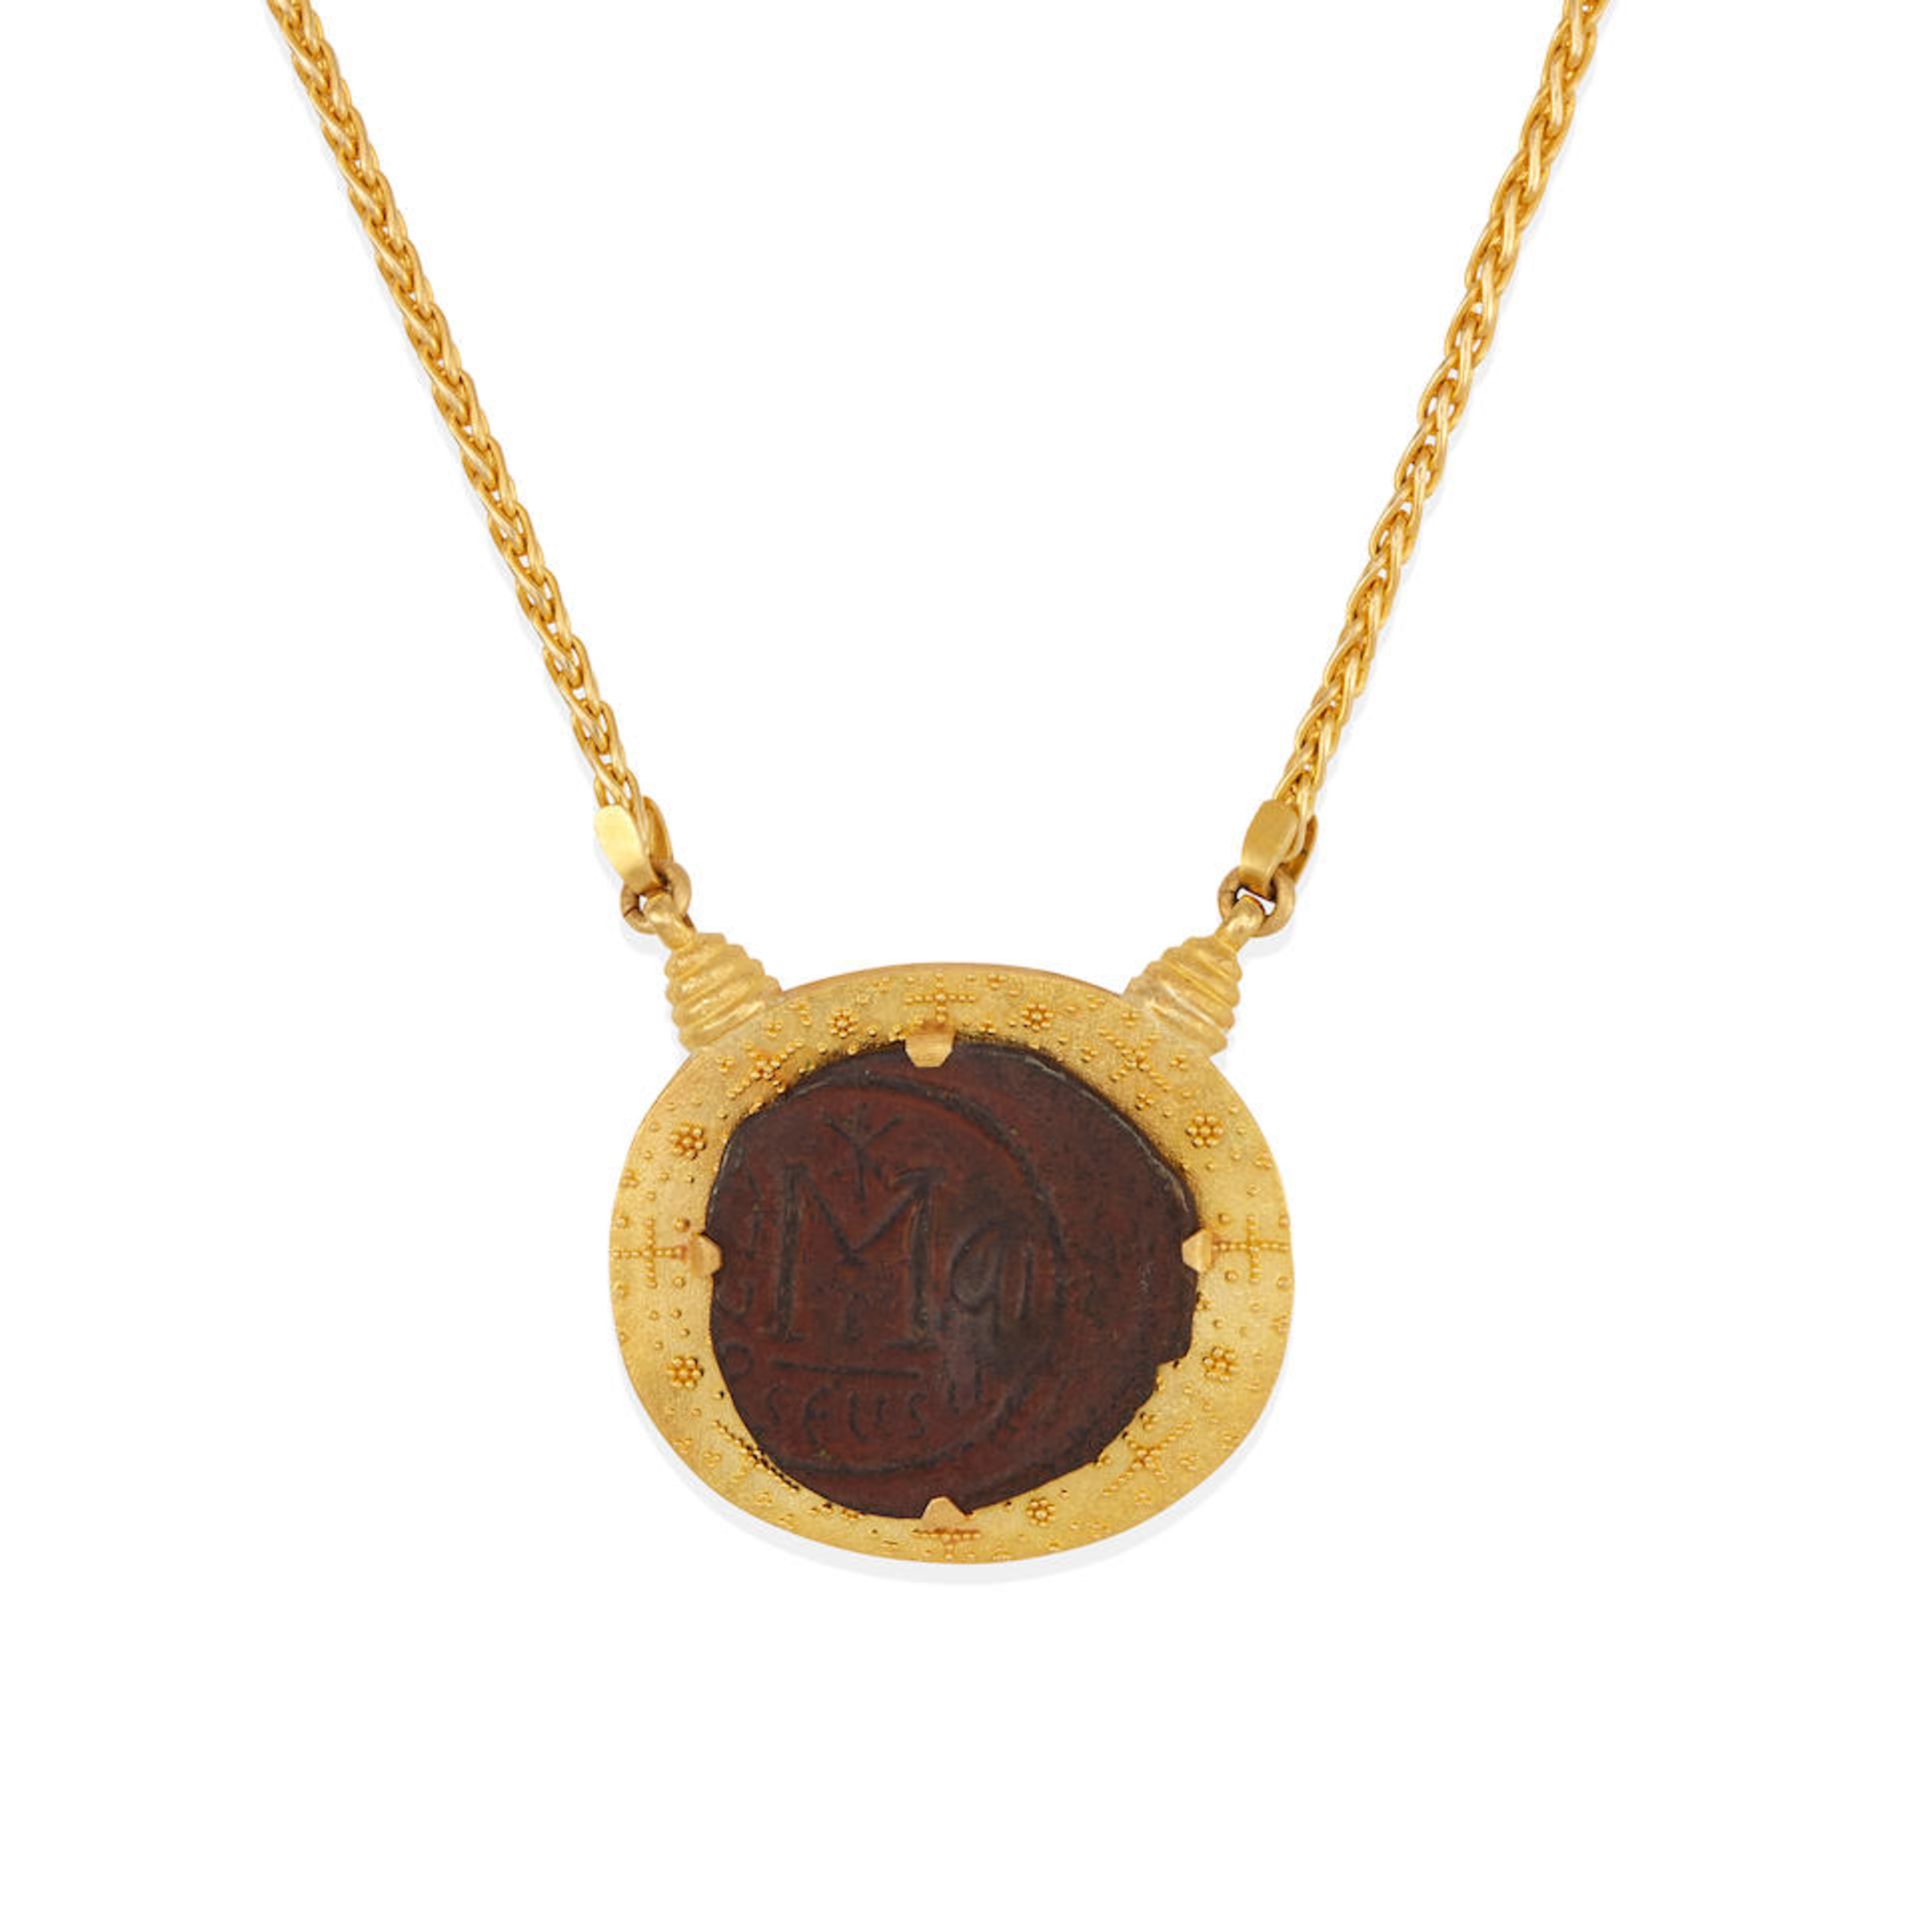 A GOLD AND COIN PENDANT NECKLACE